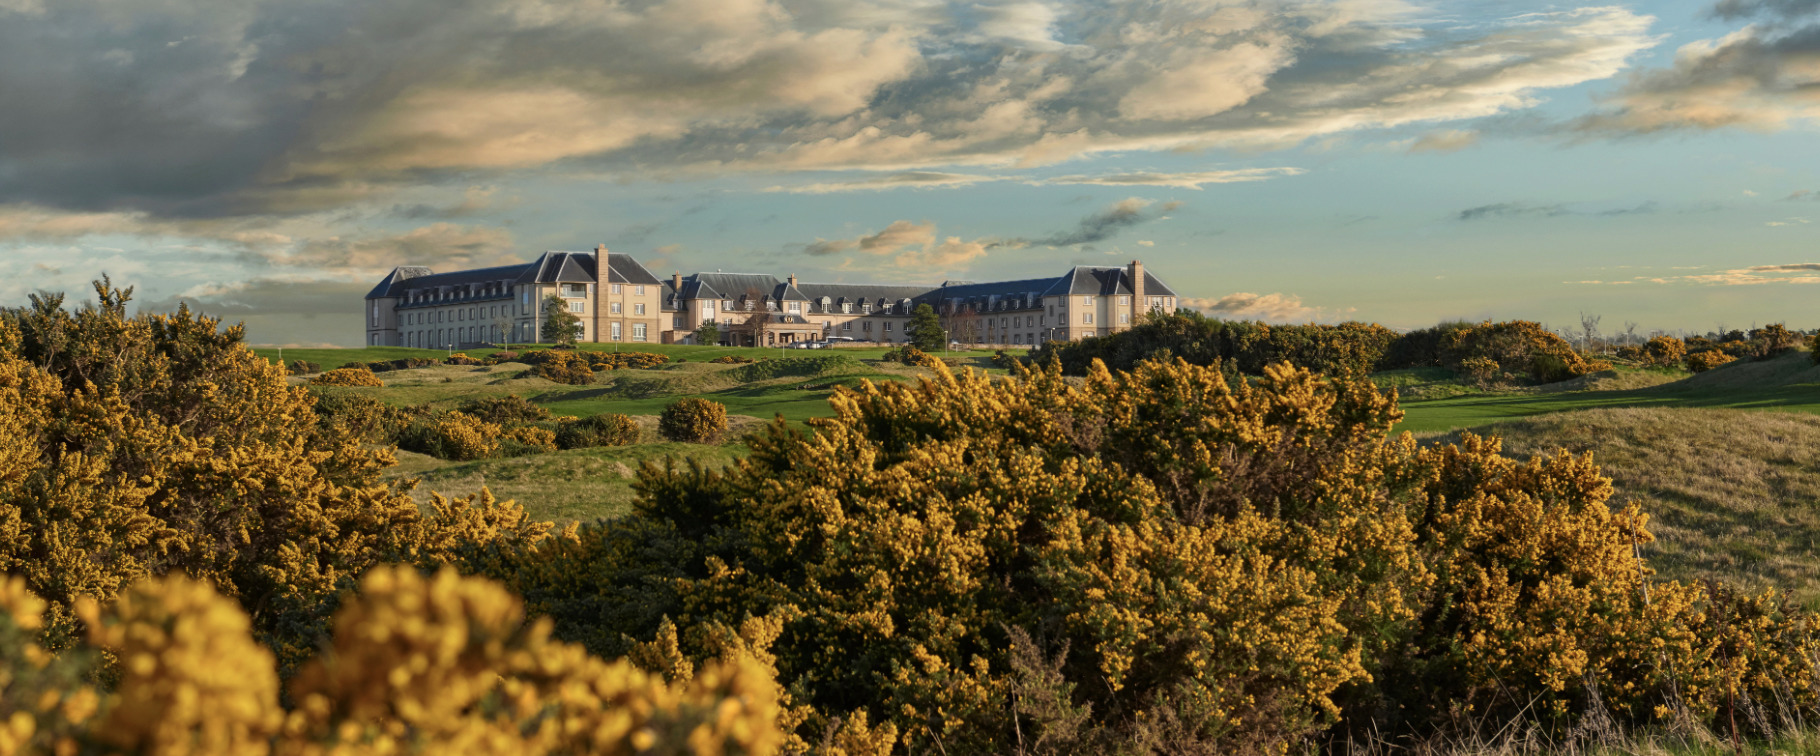 Luxuria Lifestyle's Sports Editors review Fairmont St Andrews Scotland - the ultimate golf and hospitality experience